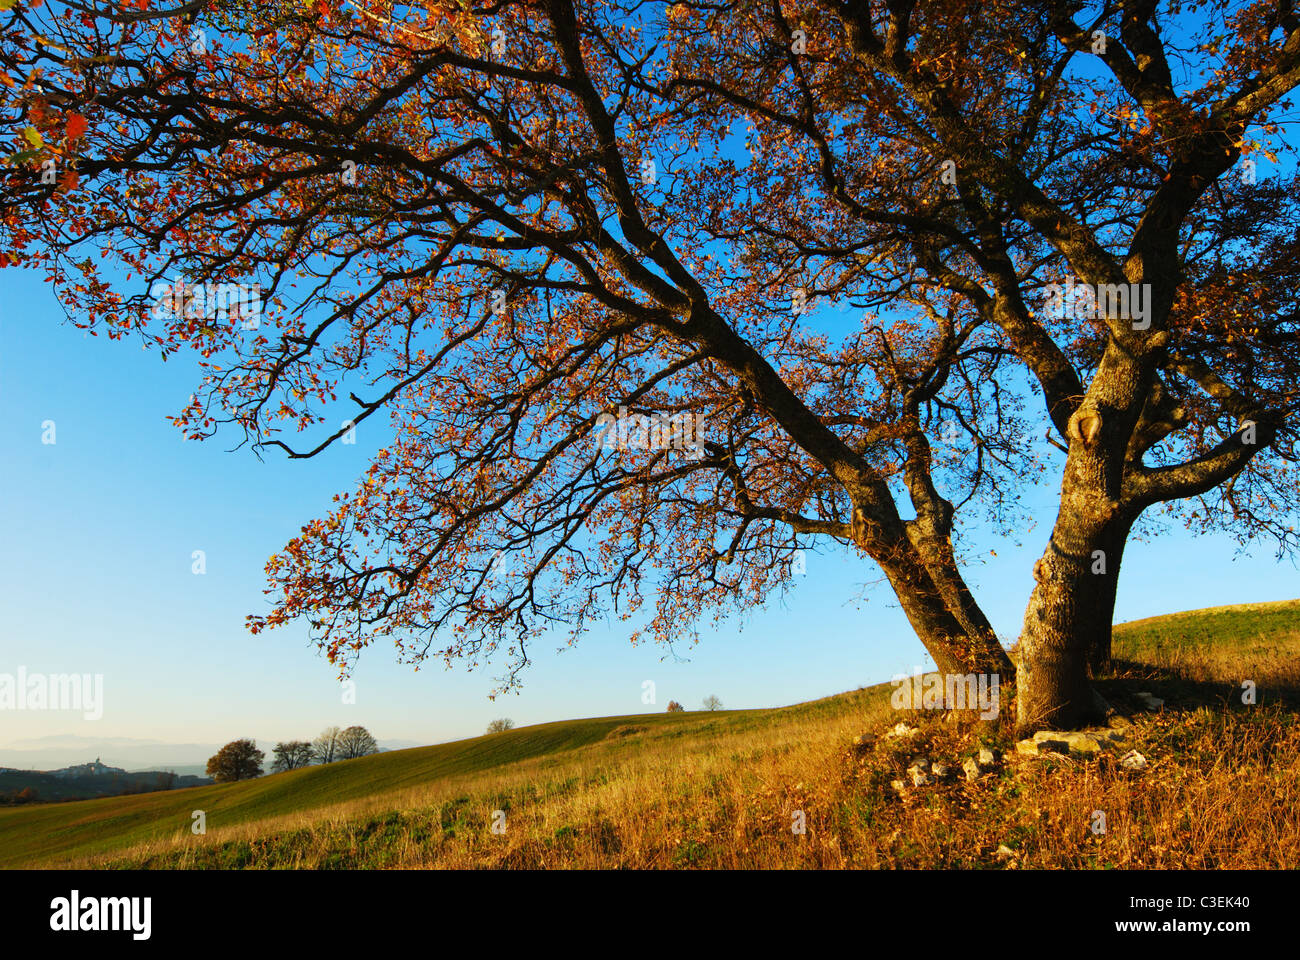 Large secular oak tree in autumn evening colors under blue sky Stock Photo